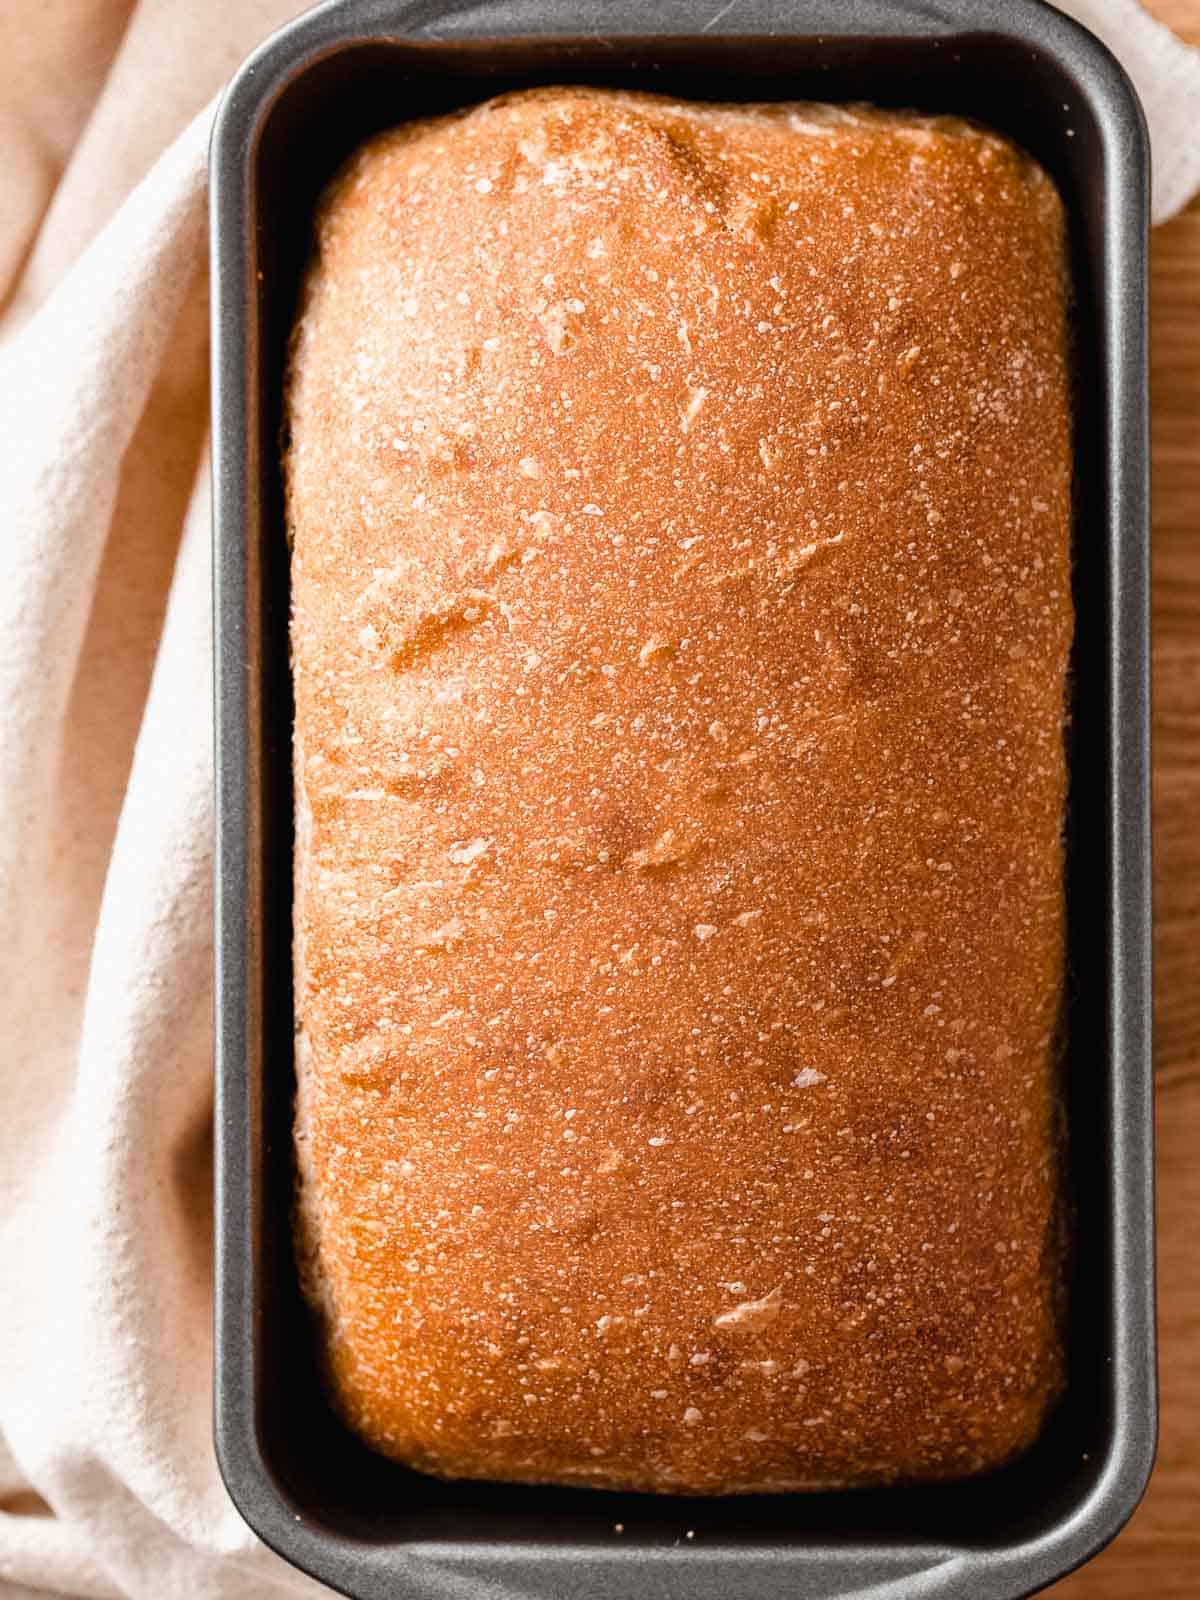 A baked loaf of bread in a loaf pan.